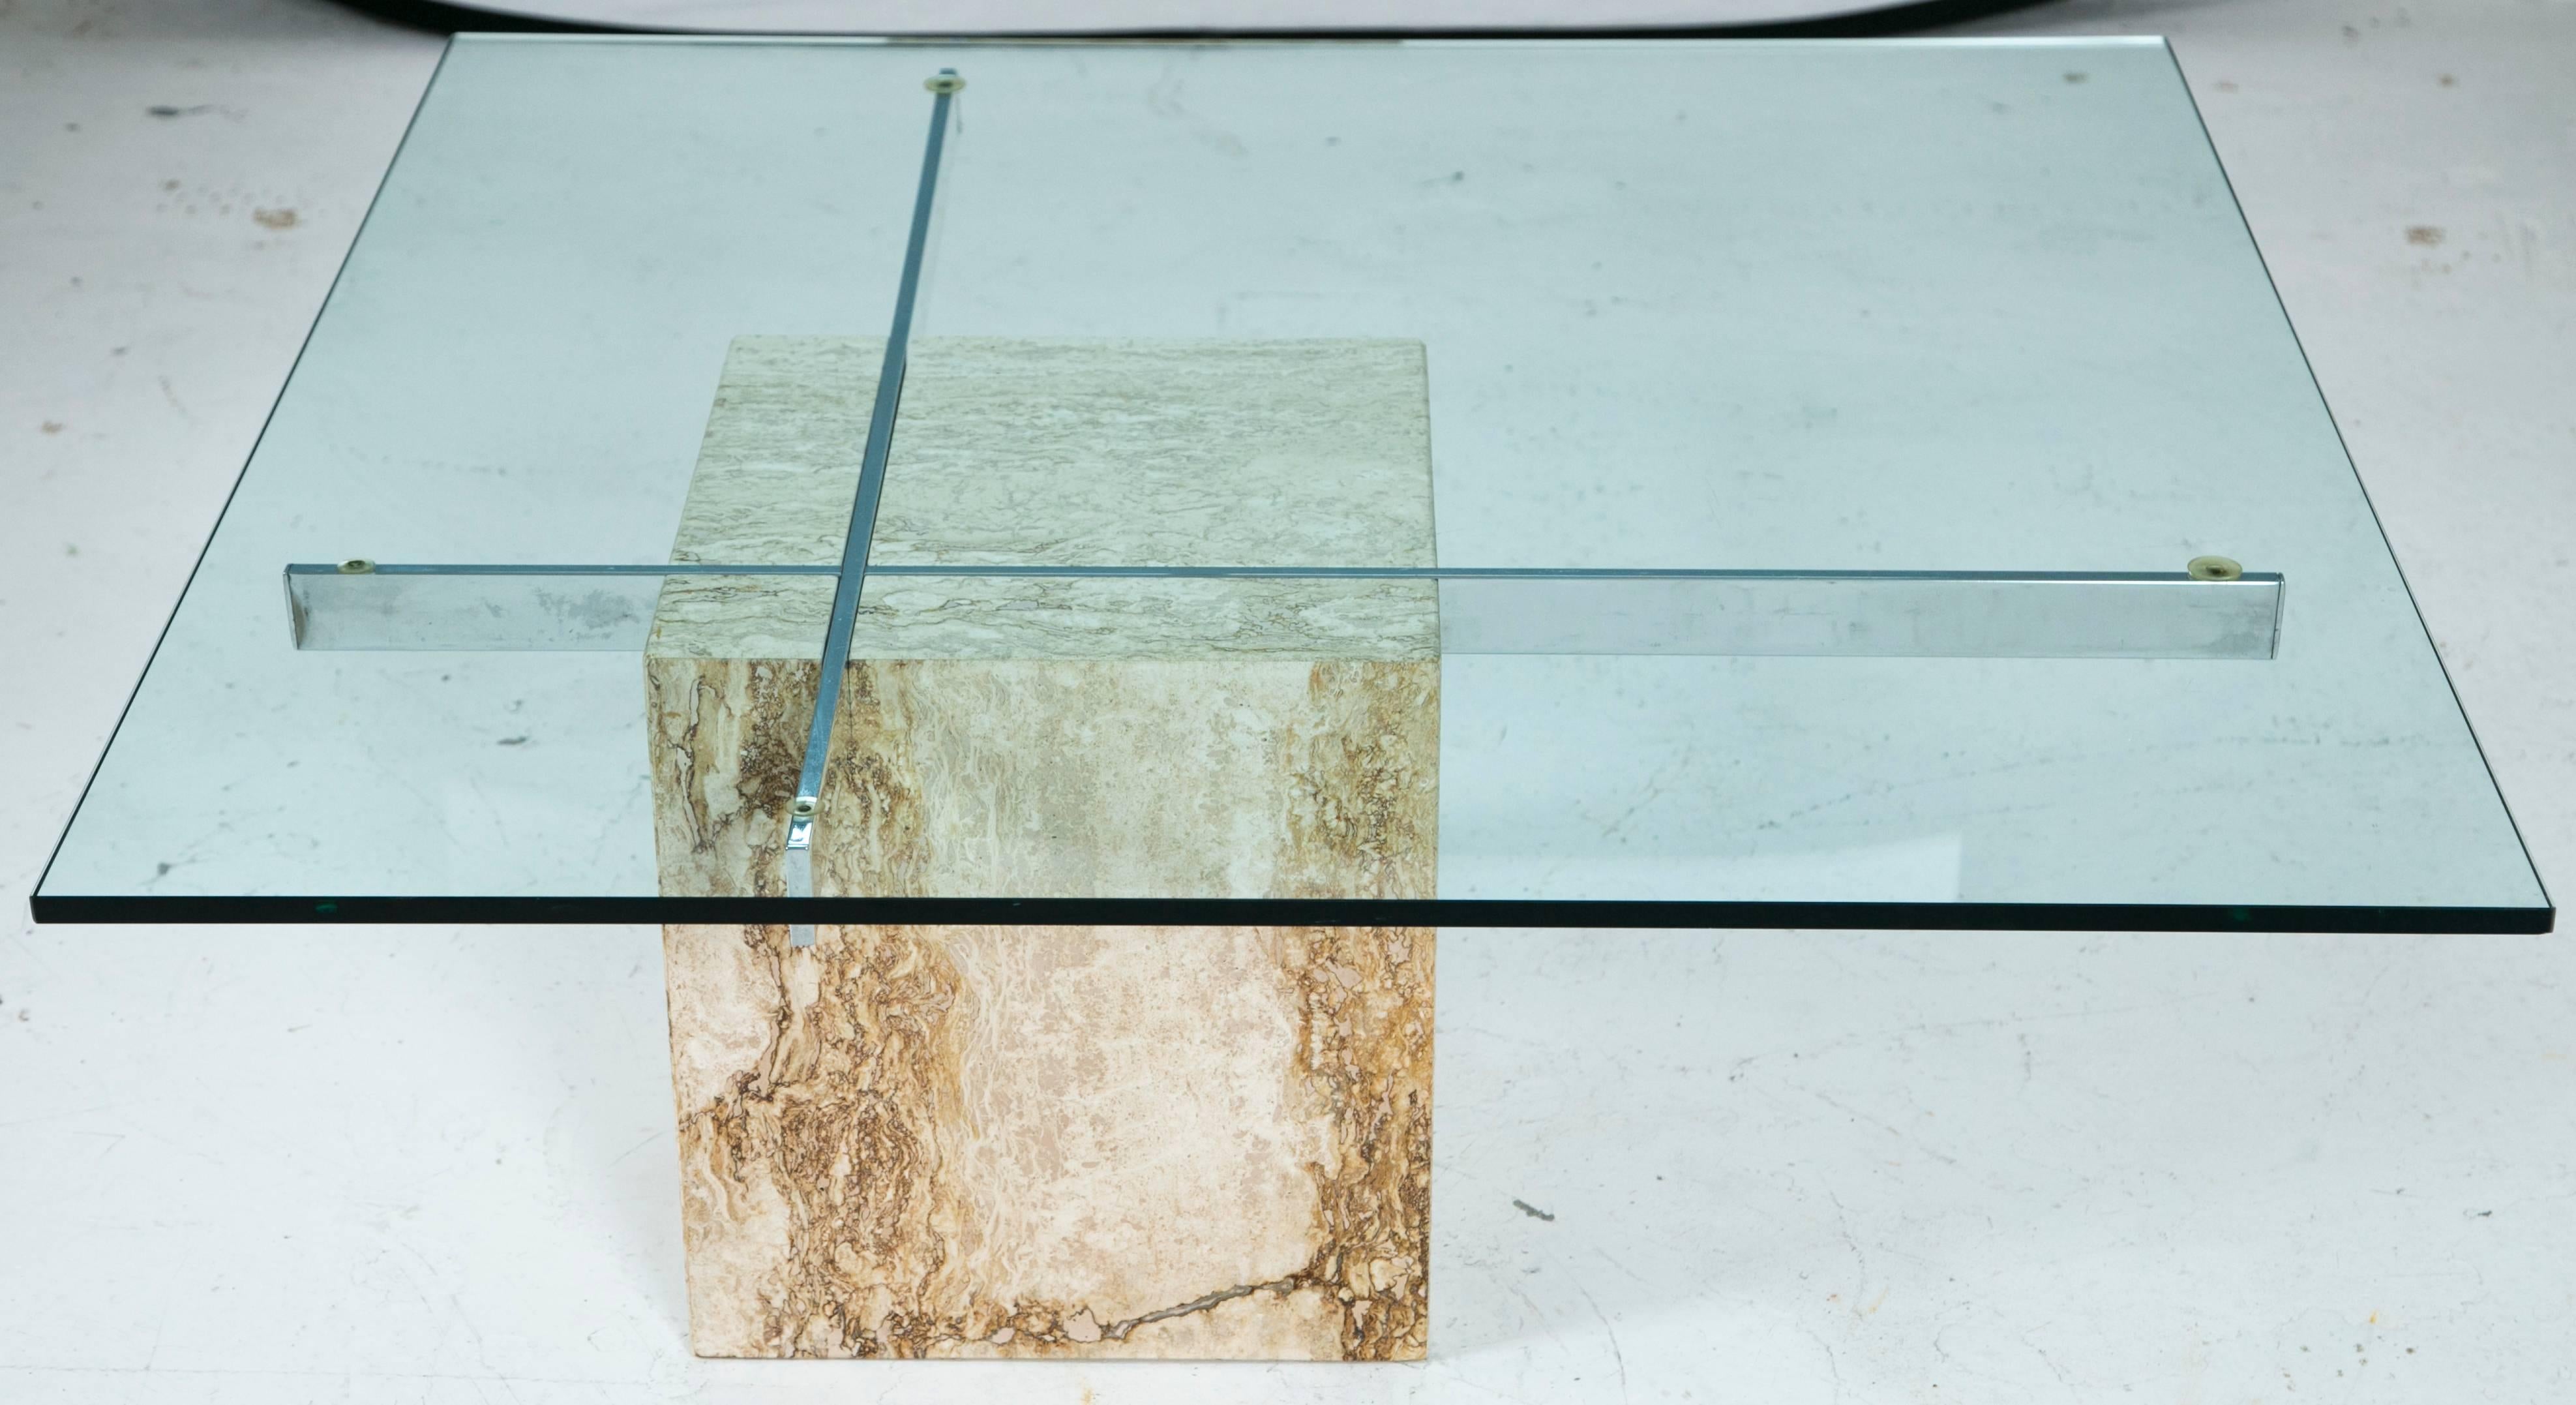 Minimalism is accentuated throughout this piece with careful use of material. One square travertine block grounds the piece both visually and physically. Chrome bars cantilever outward supporting a square piece of glass that sits strong on top.